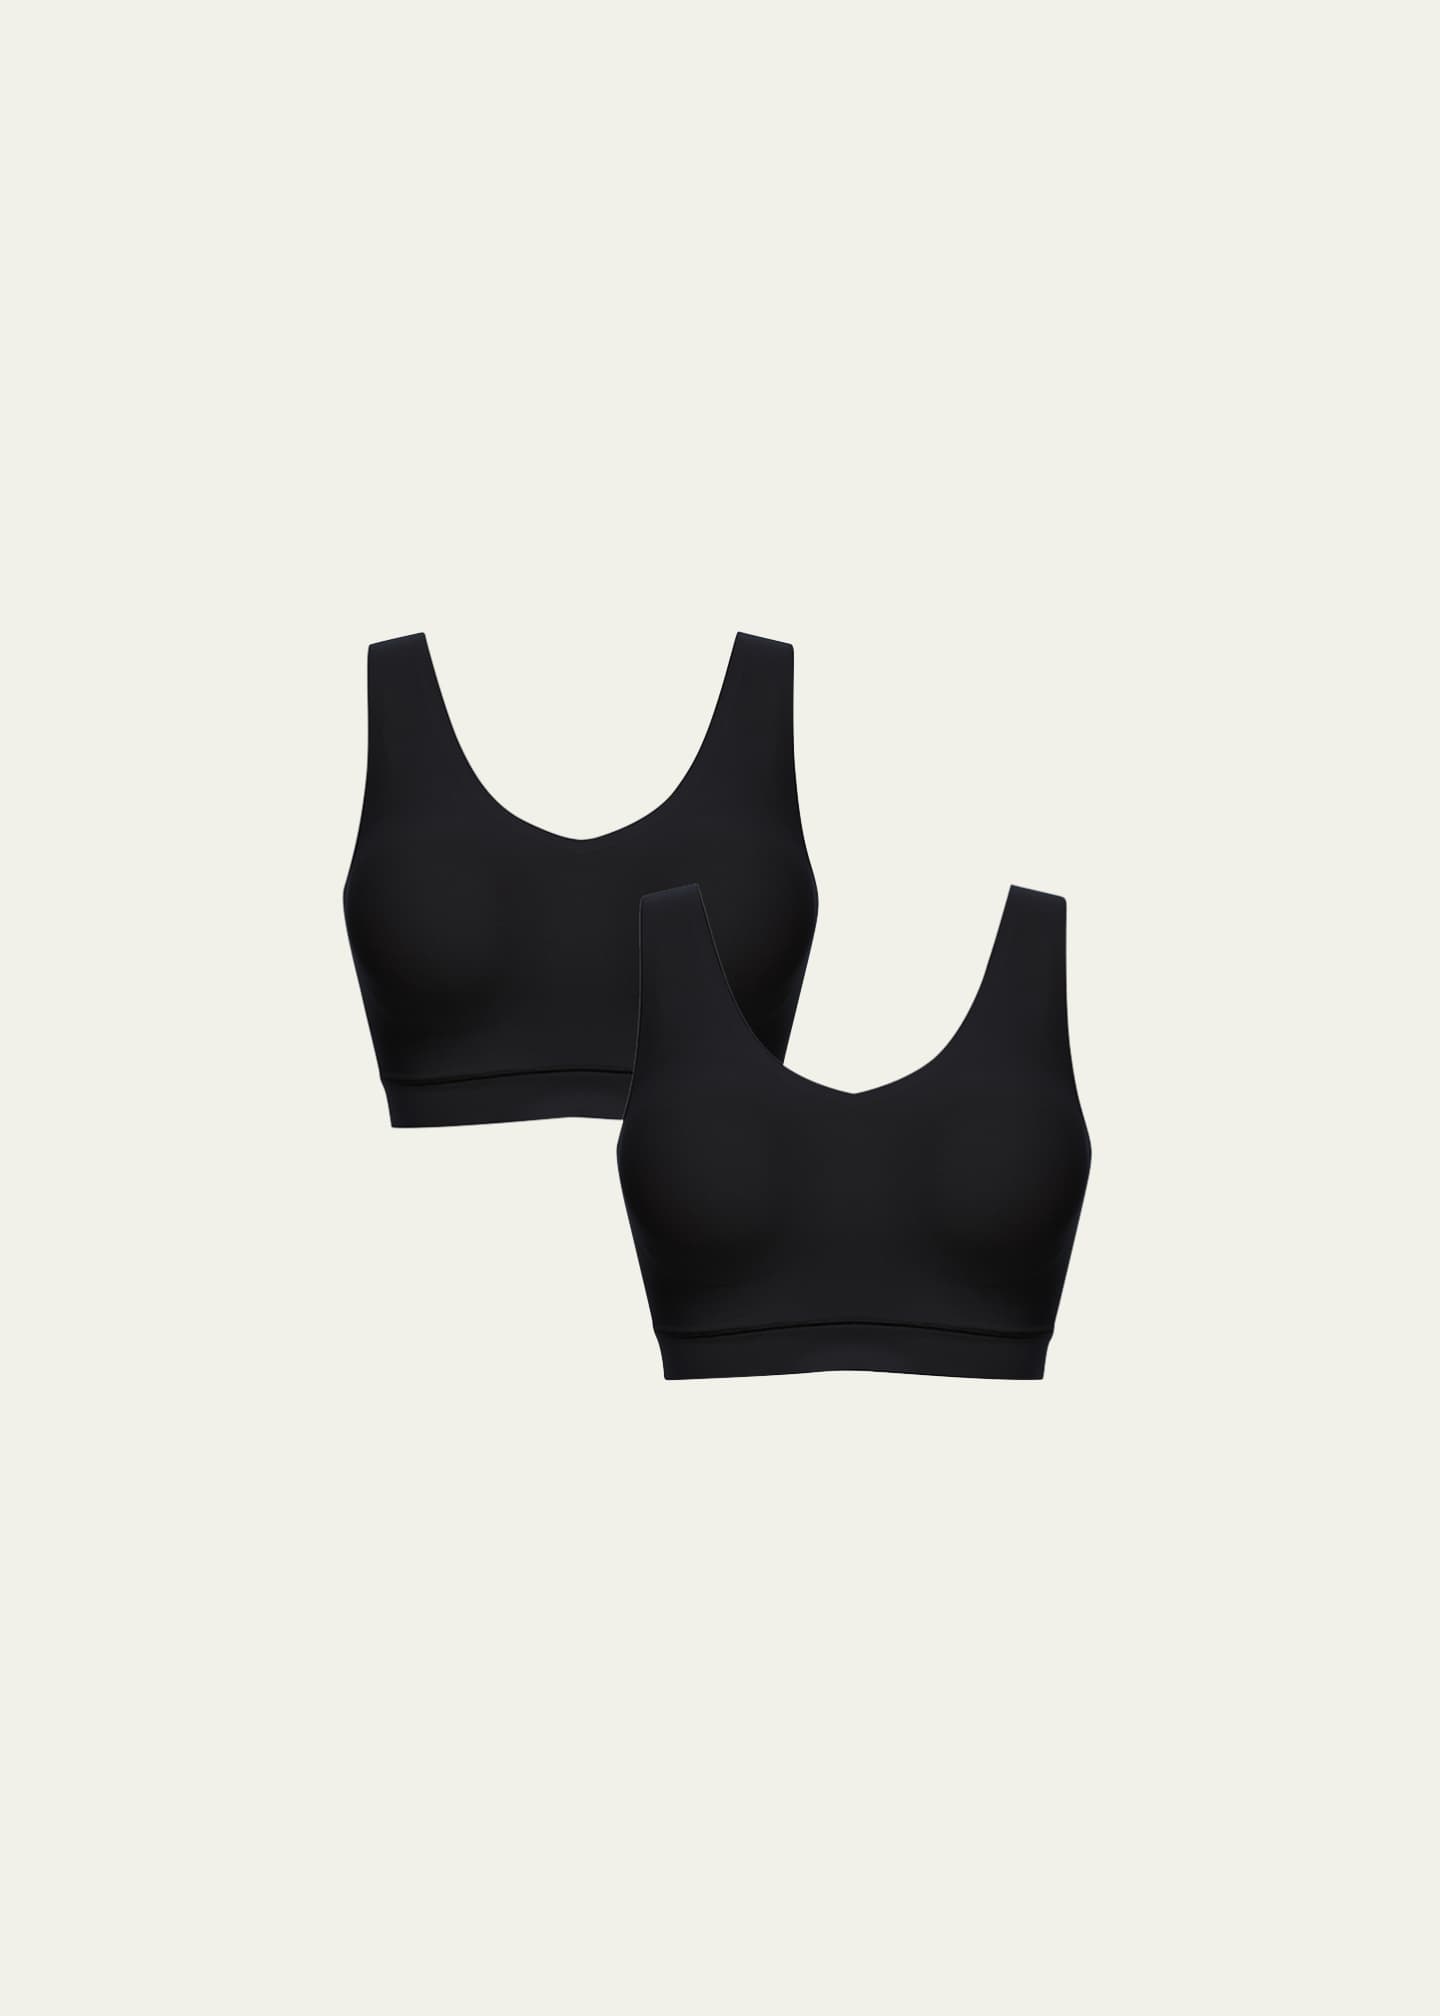 Buy Chantelle Soft Stretch Seamless V-Neck Padded Crop Top